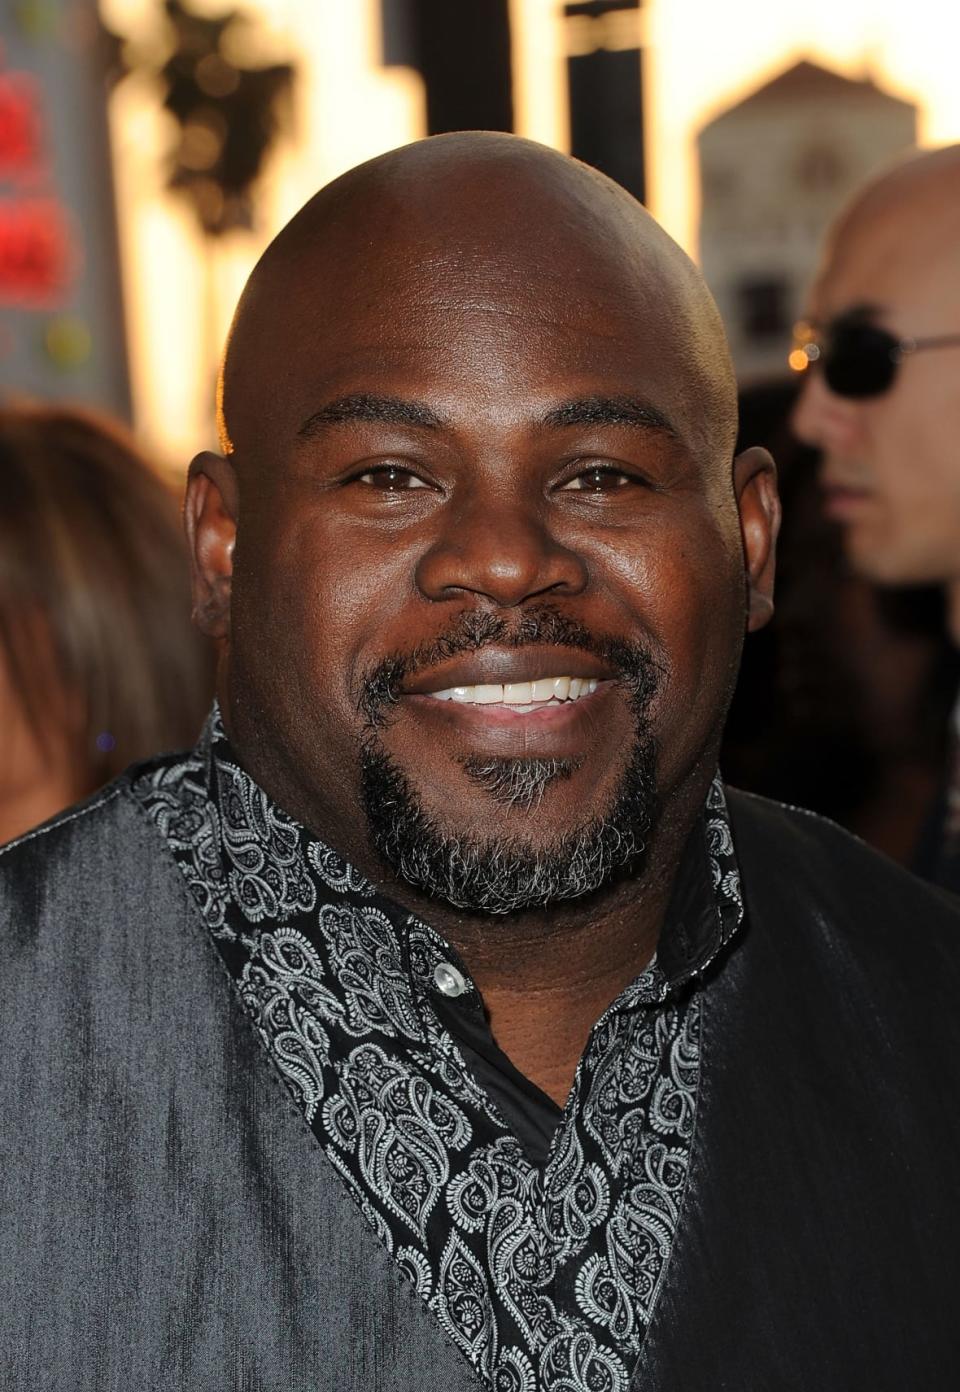 Actor and gospel singer David Mann said he sought counseling for his depression. (Photo by Jason Merritt/Getty Images)